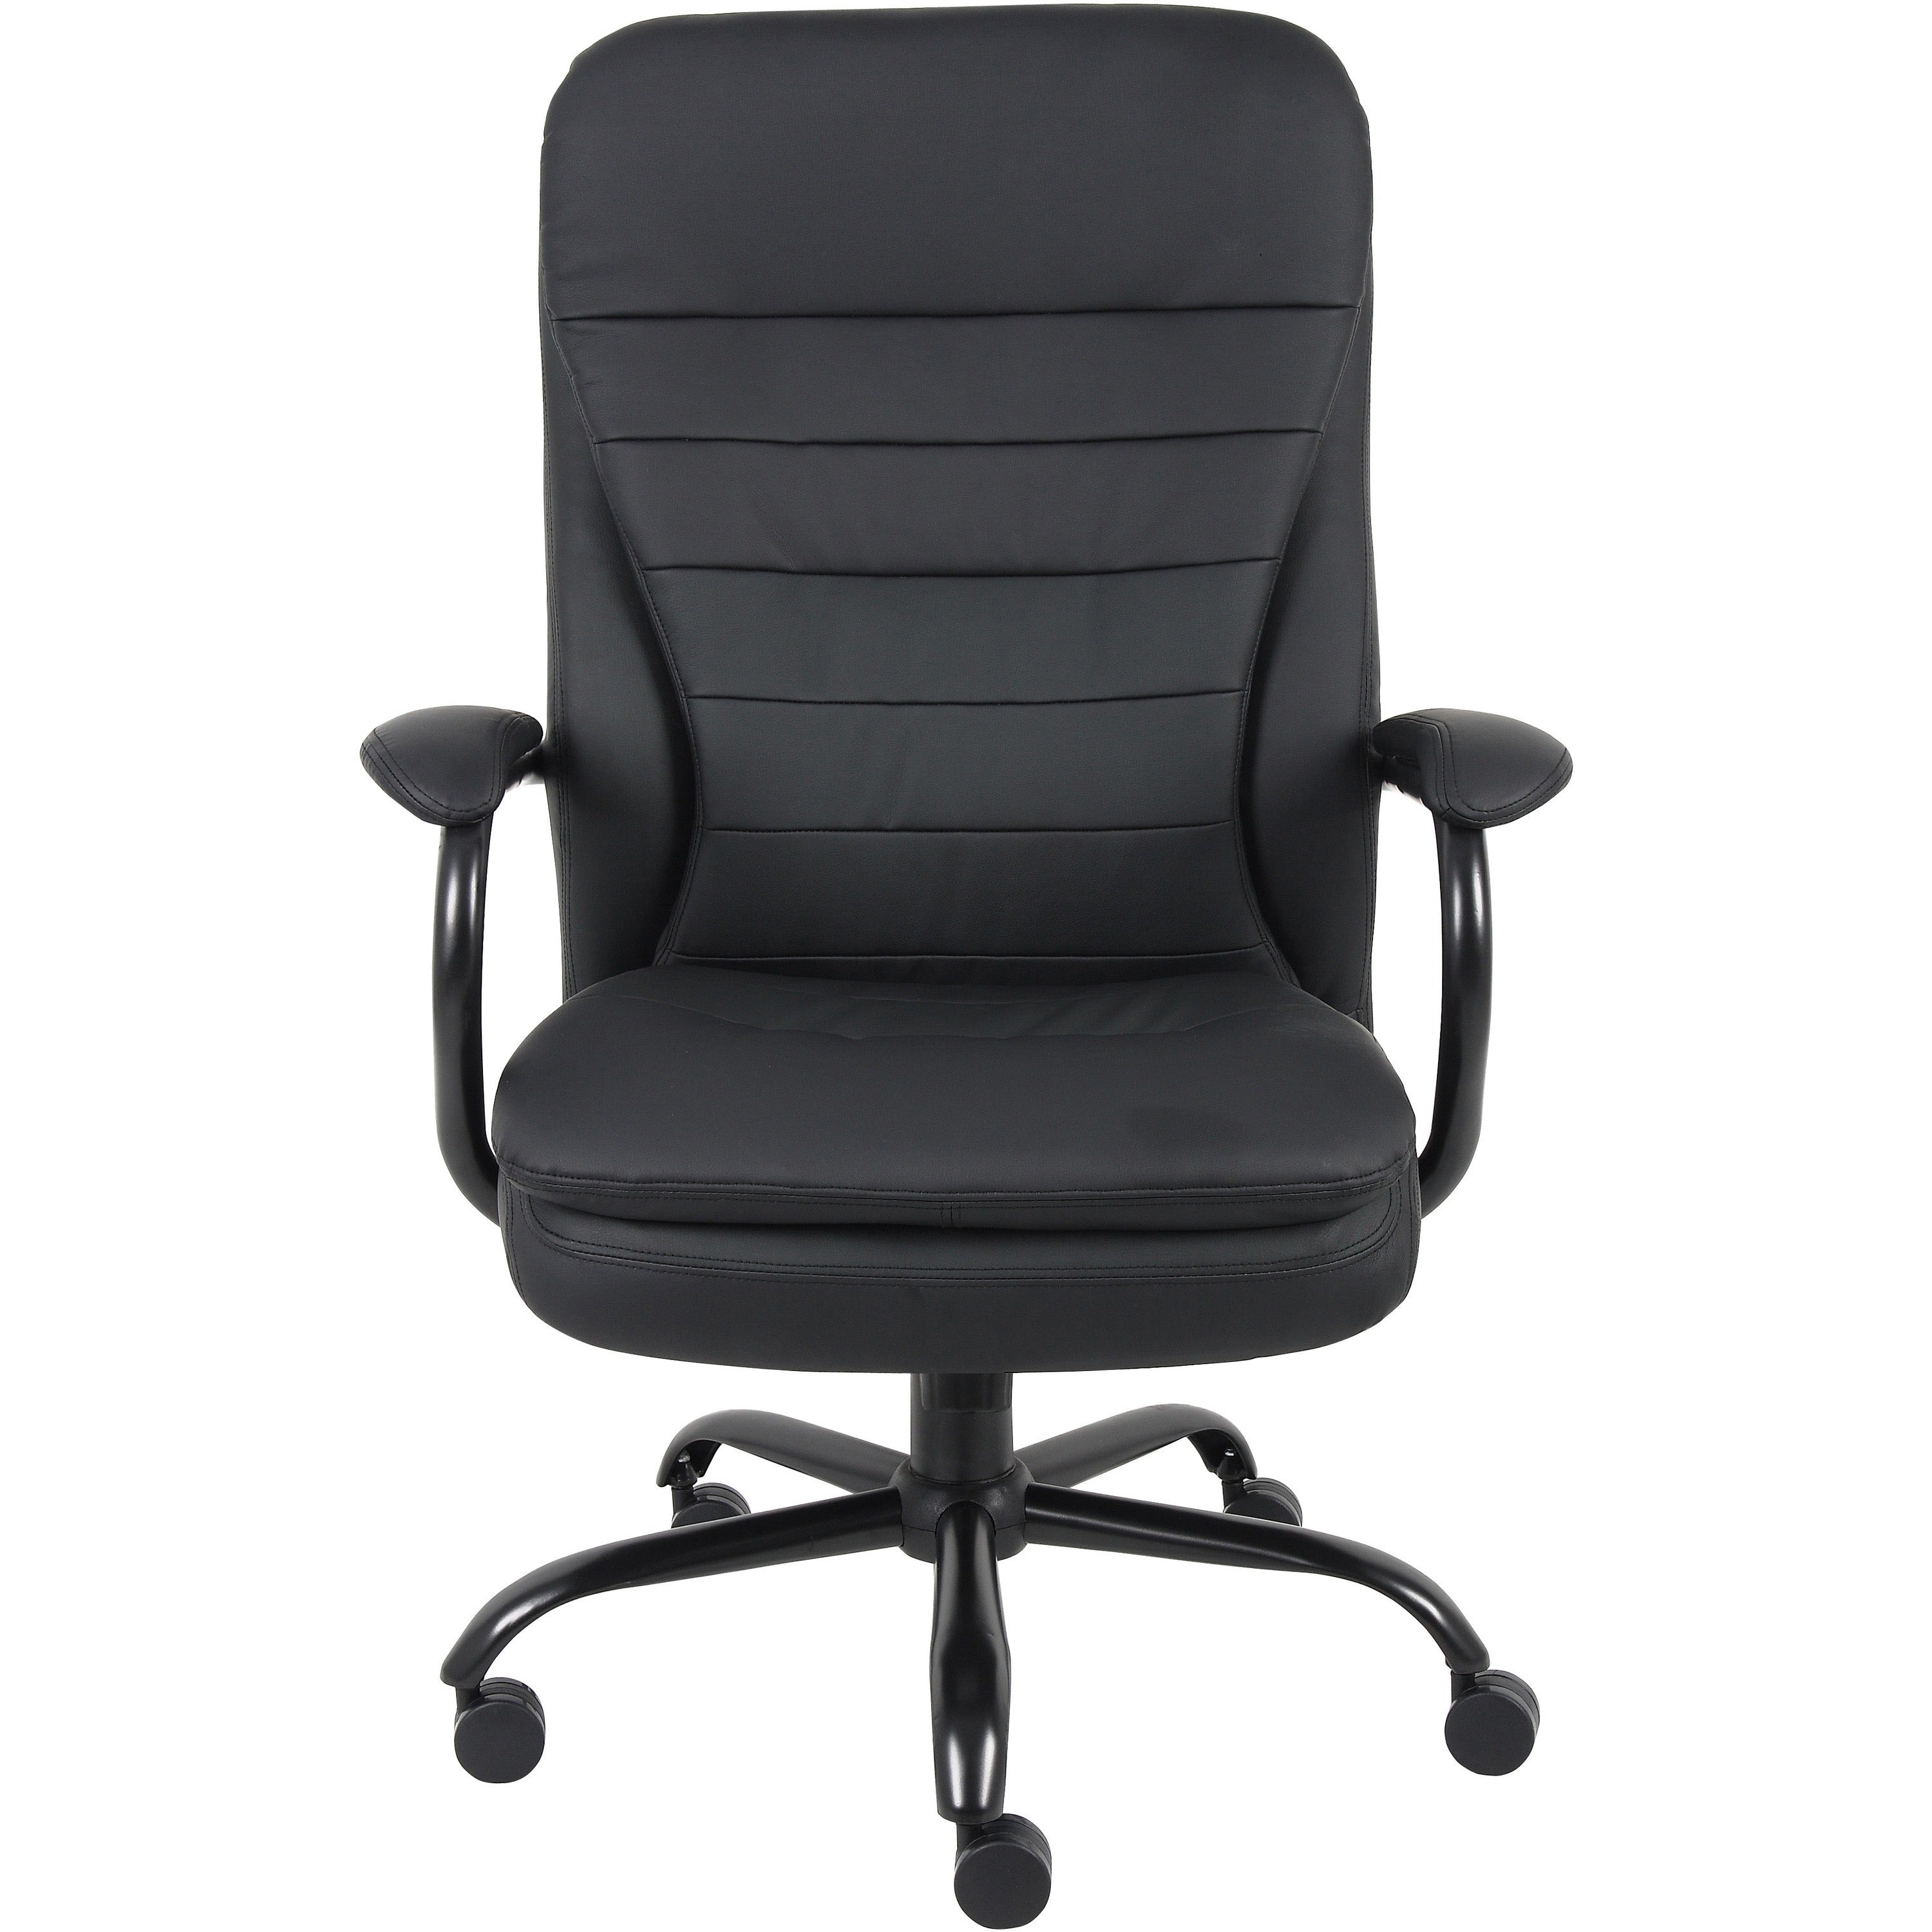 Lorell Big & Tall Double Cushion Executive High-Back Chair - Black Leather Seat - Black Leather Back - 5-star Base - Black - 1 Each - 